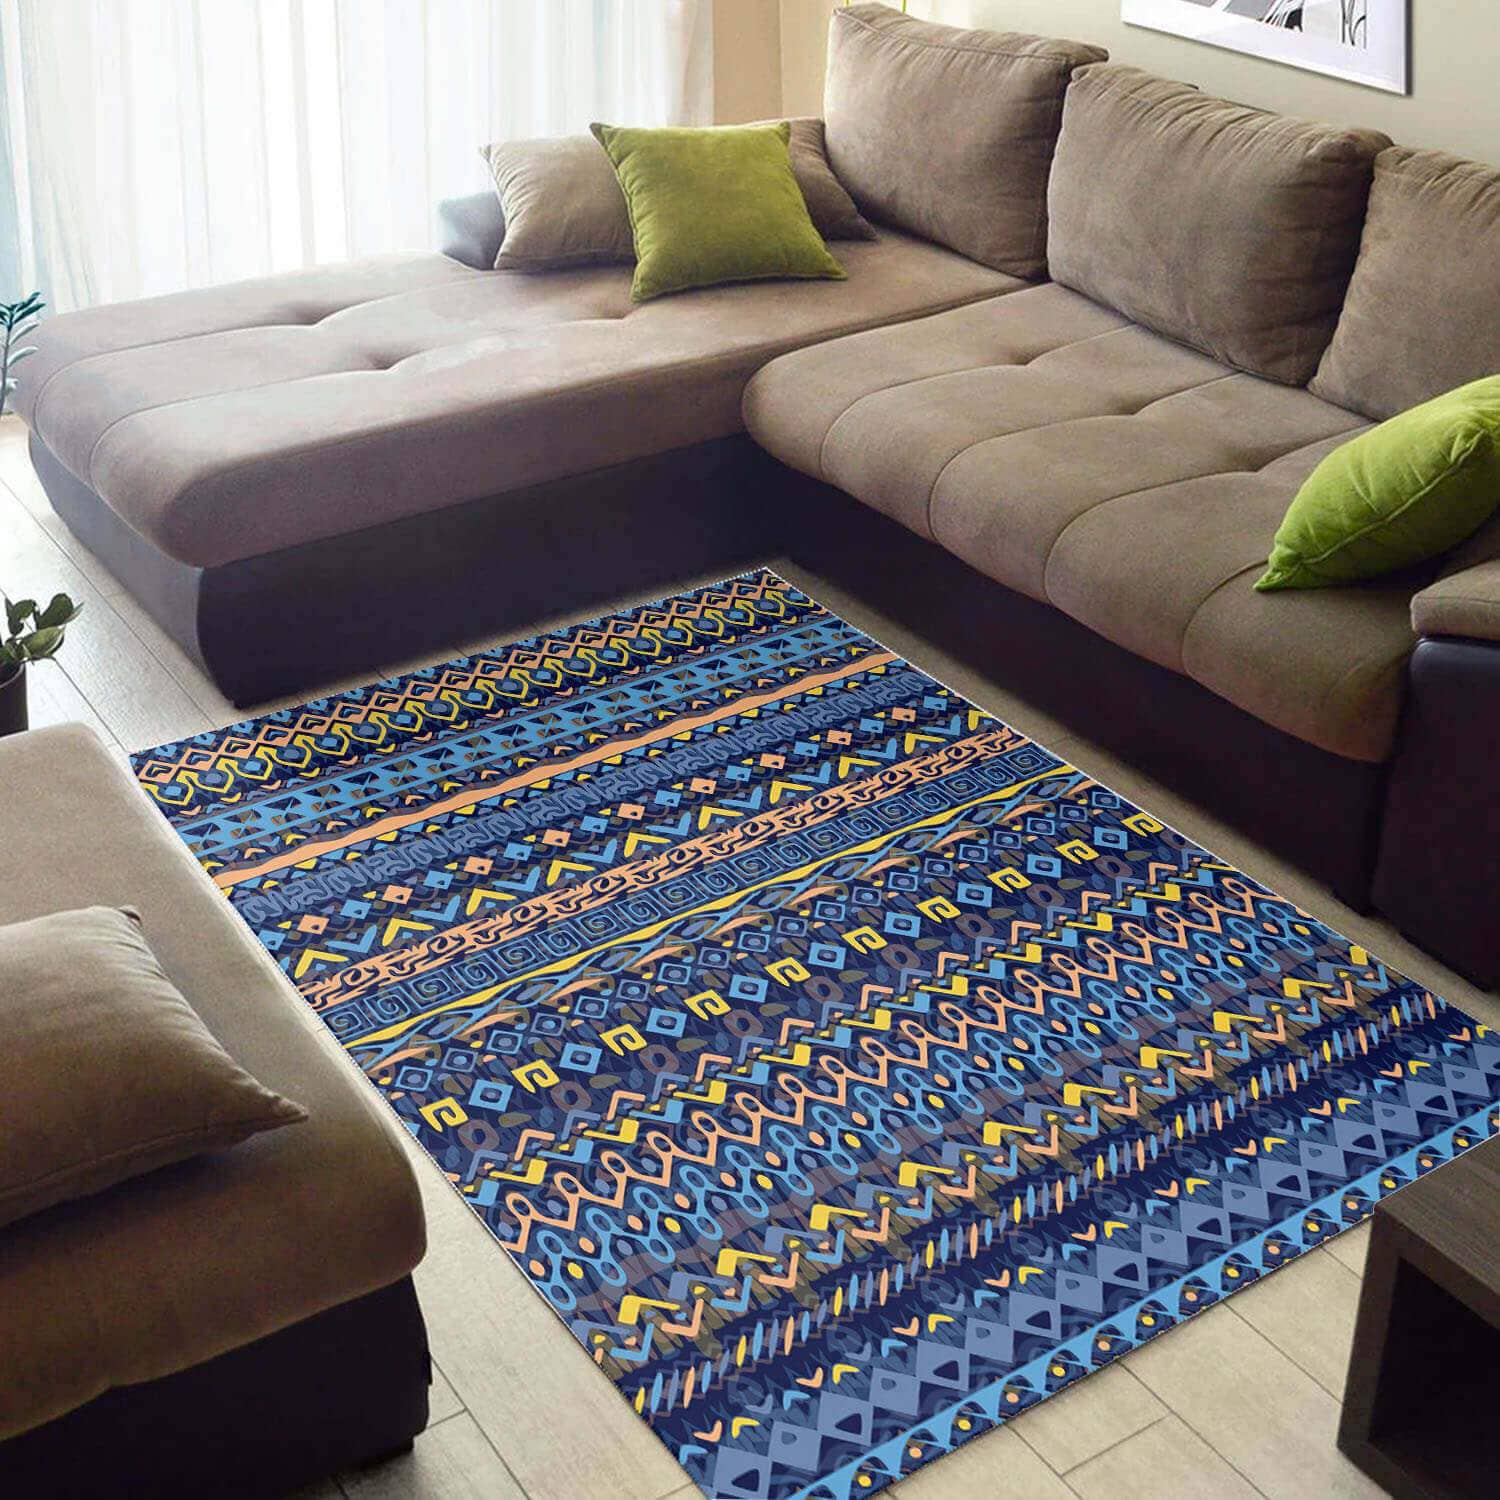 Inspired African Adorable Afrocentric Art Design Floor House Rug